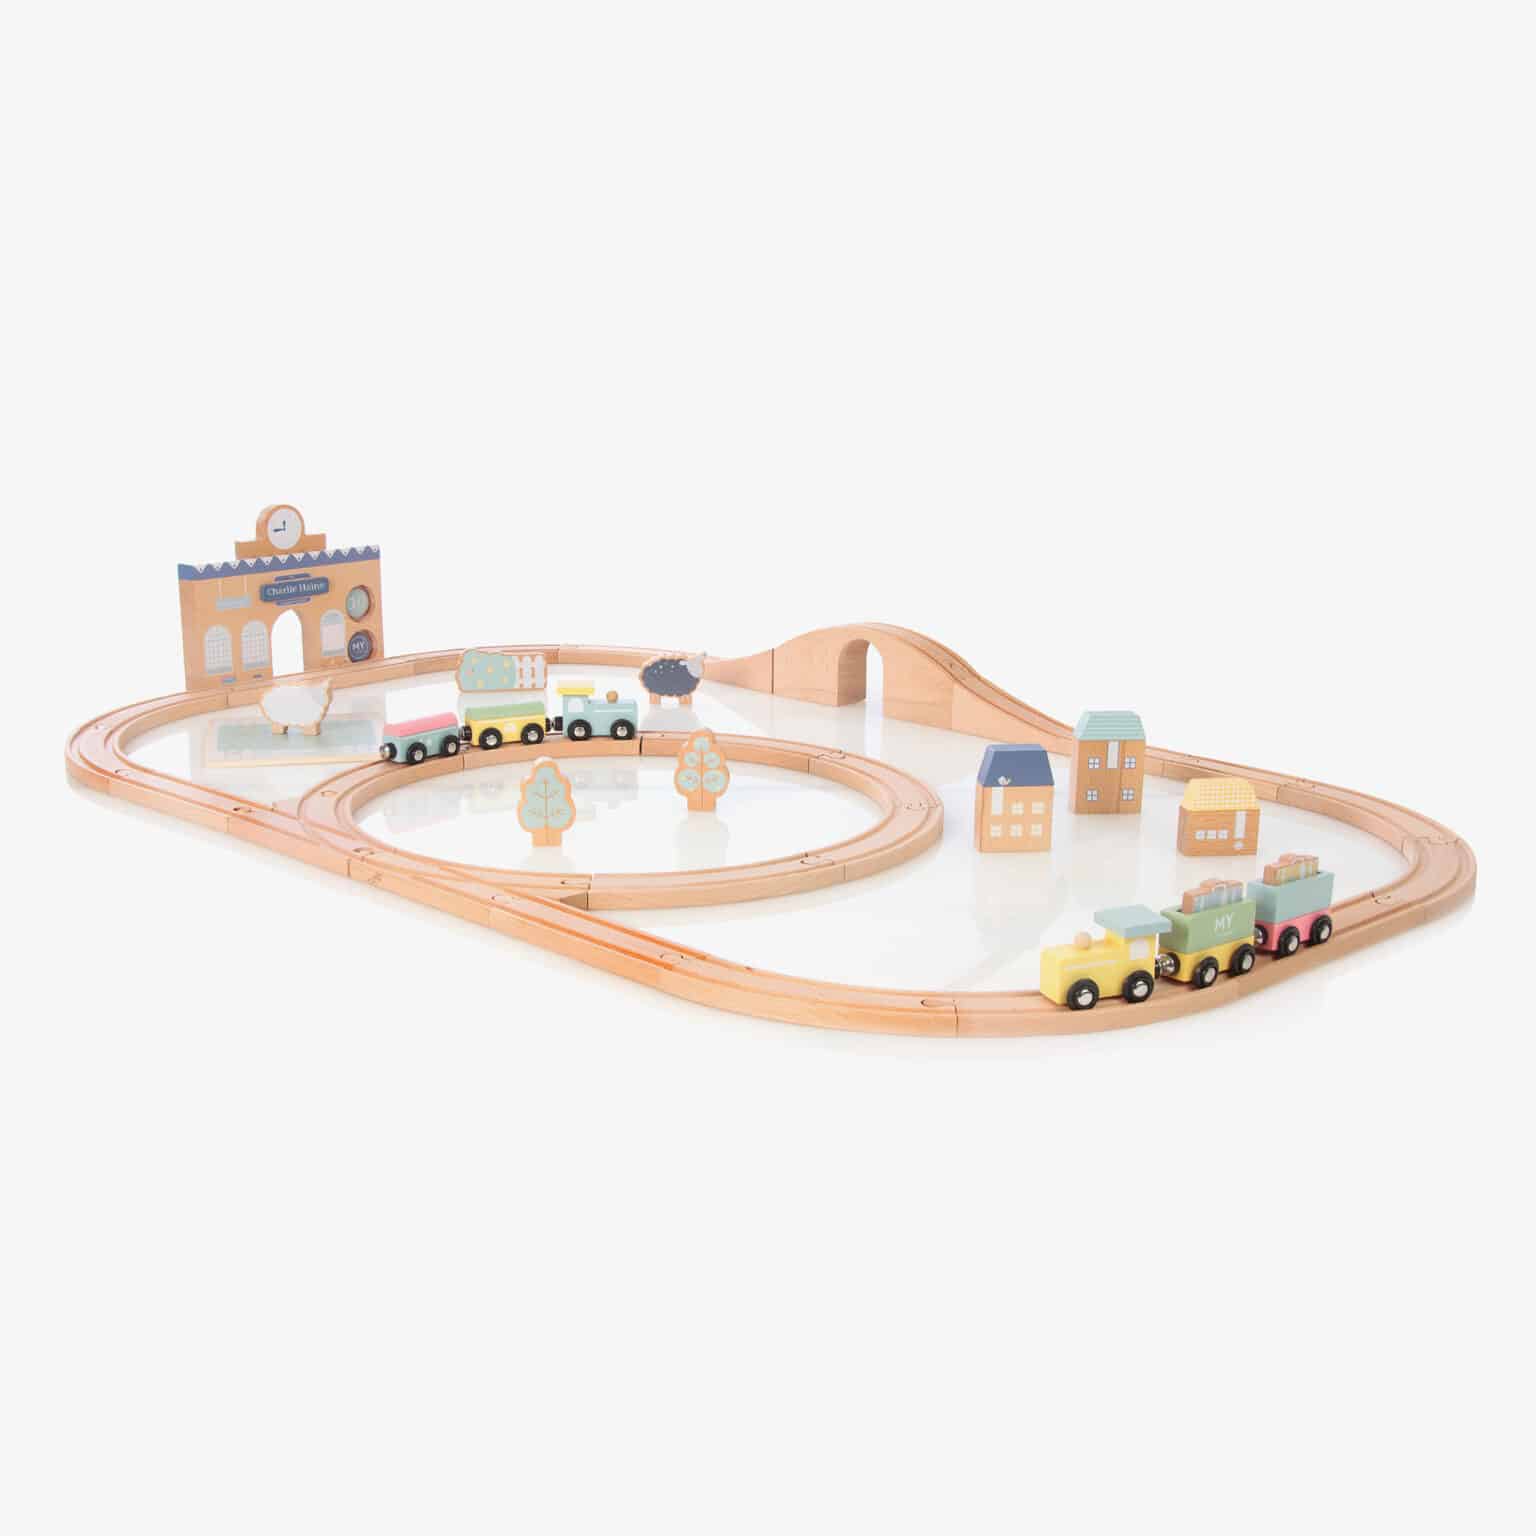 My St Years Personalised Wooden Train Set Cm £ Available At Childrensalon Com Copy